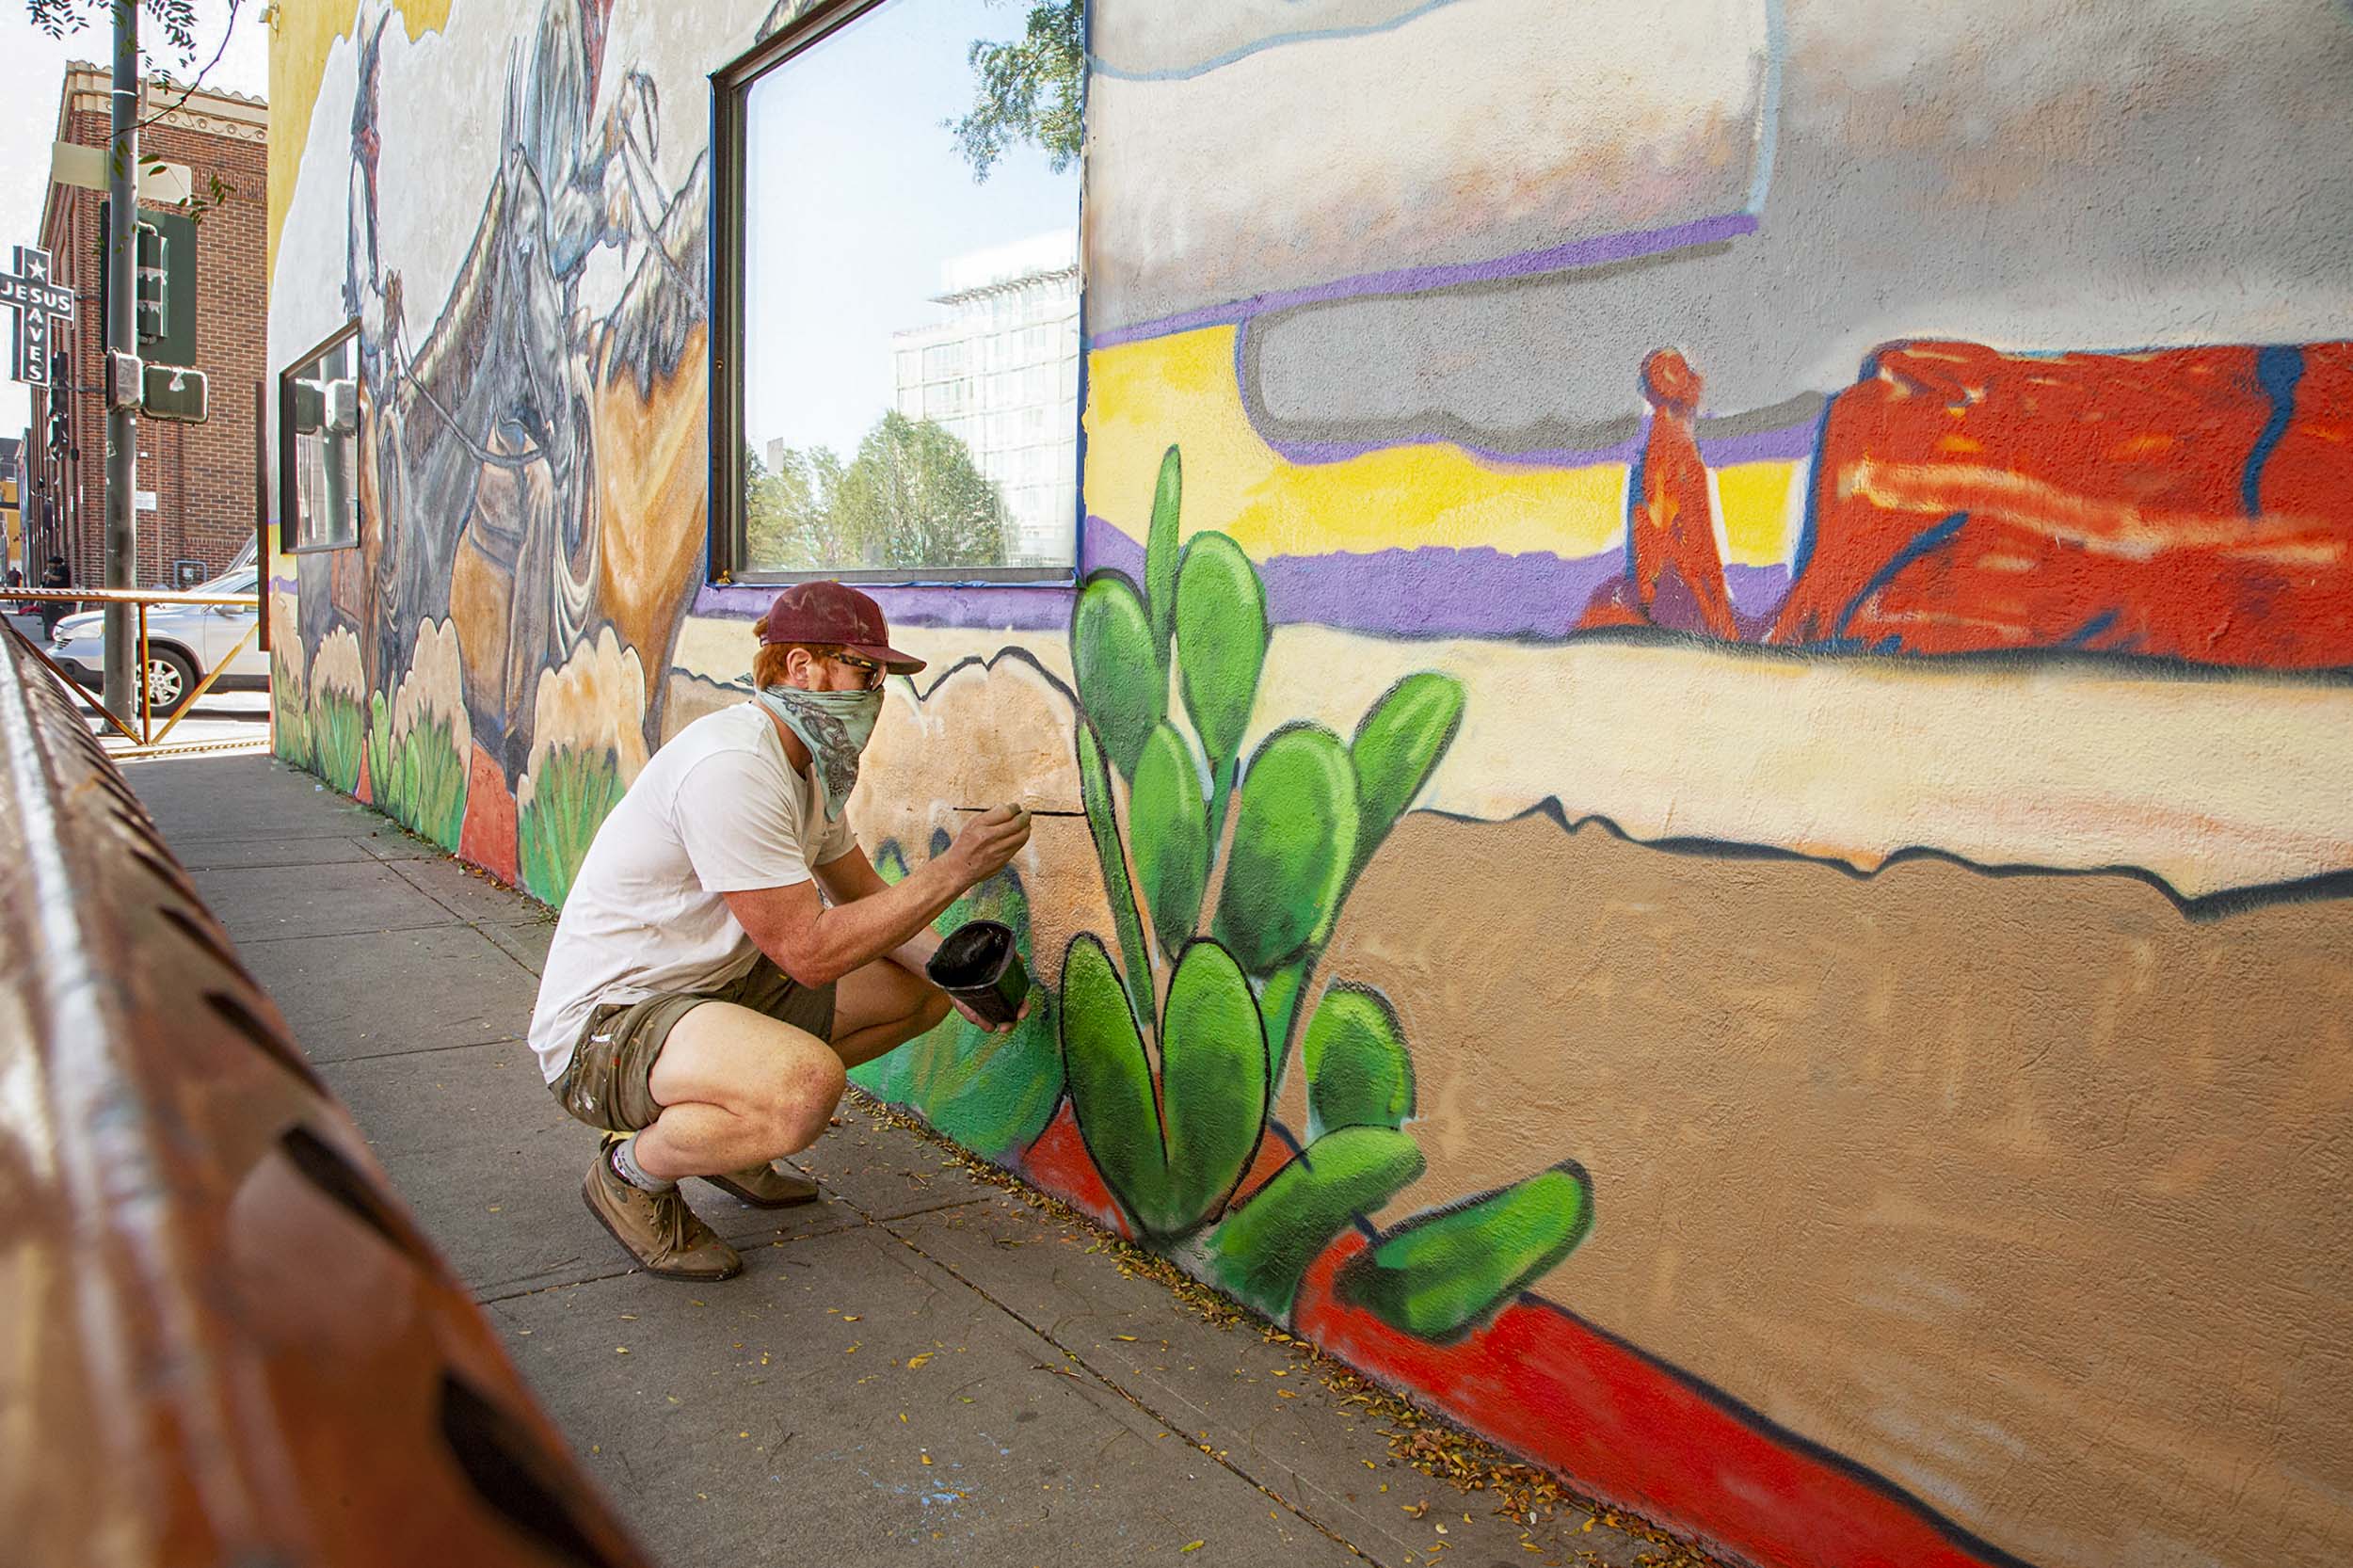 Will Baker painting a mural on the outside of a building